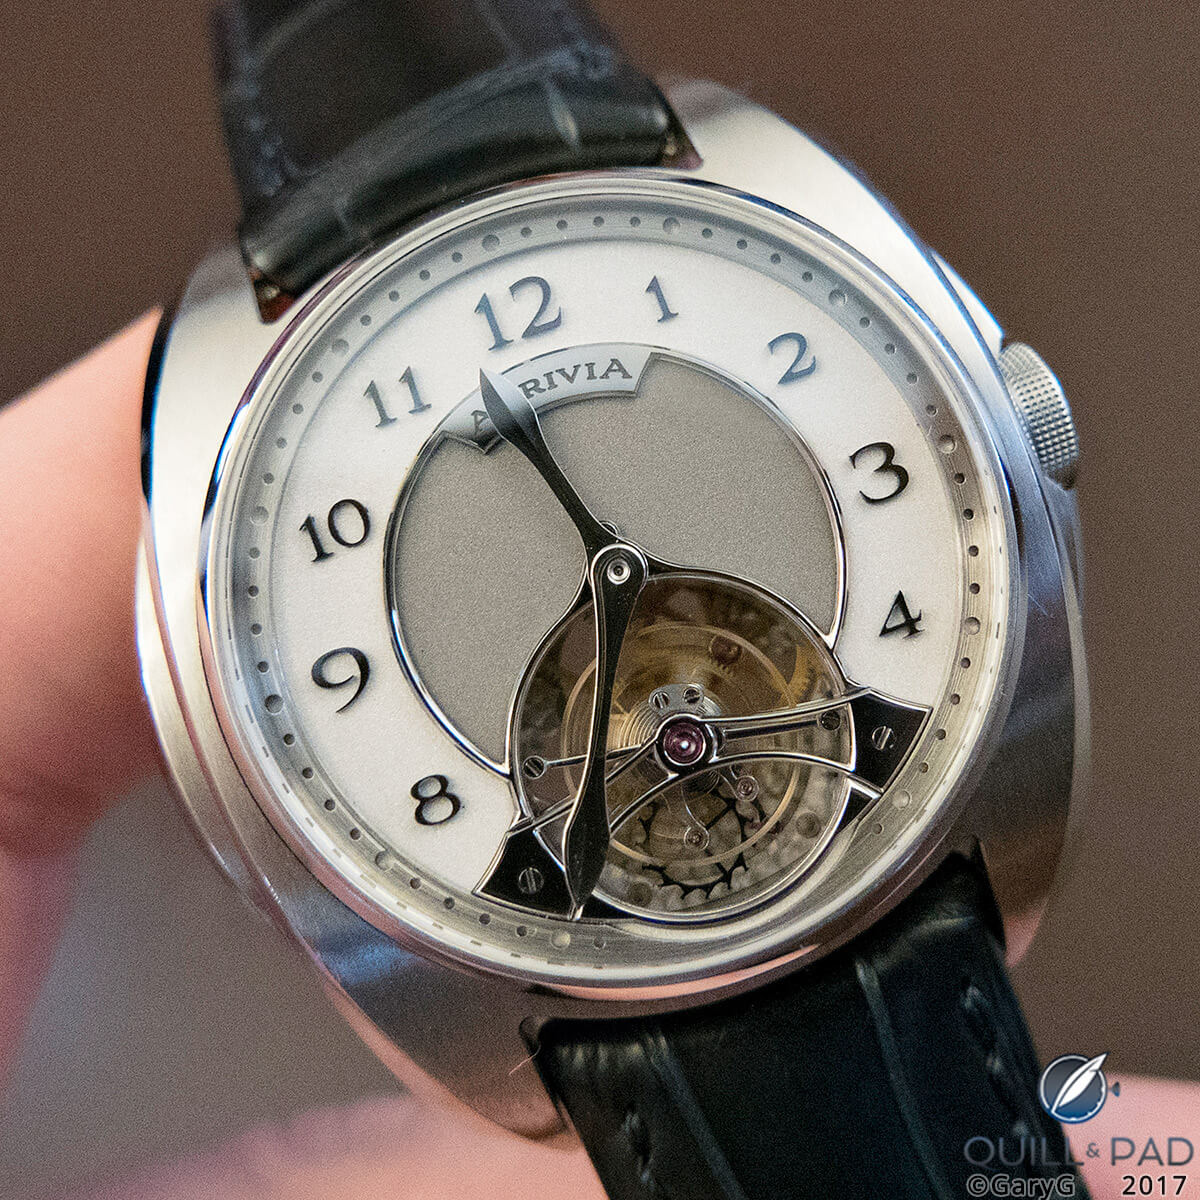 Uniformly recognizable: characteristic case shape of Akrivia watches, here on the Tourbillon Hour Minutes